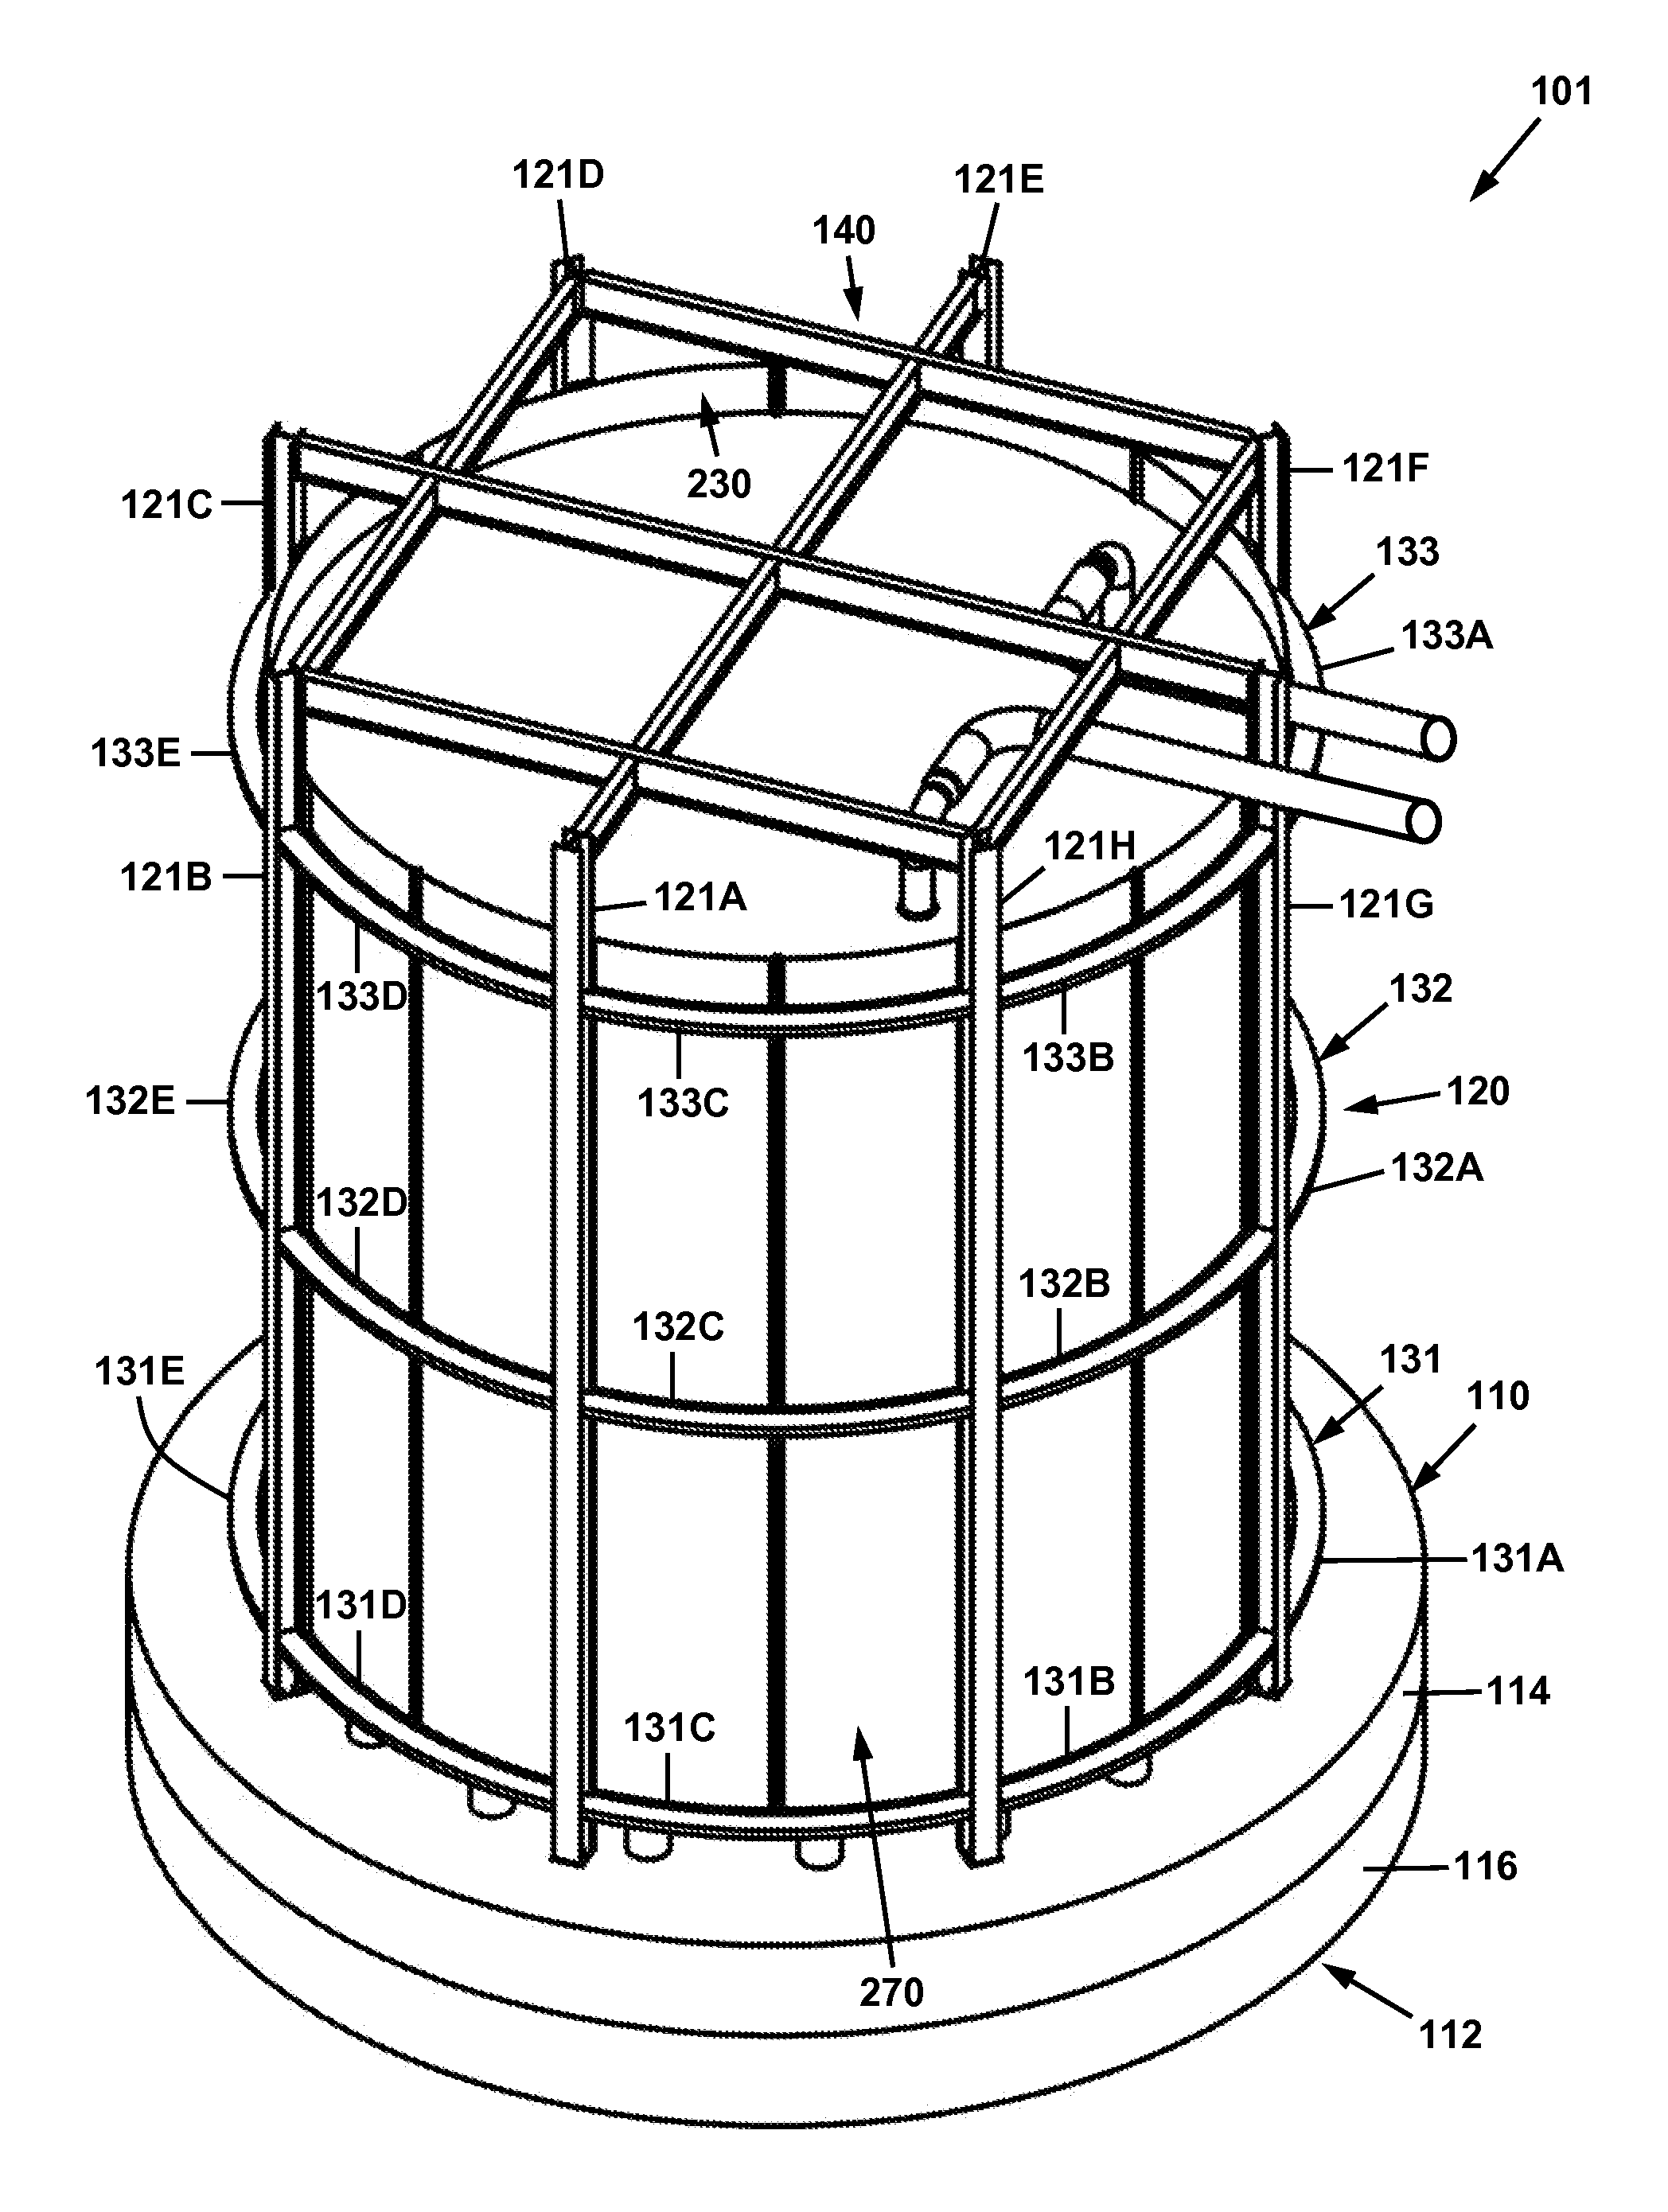 Energy storage vessel, systems, and methods